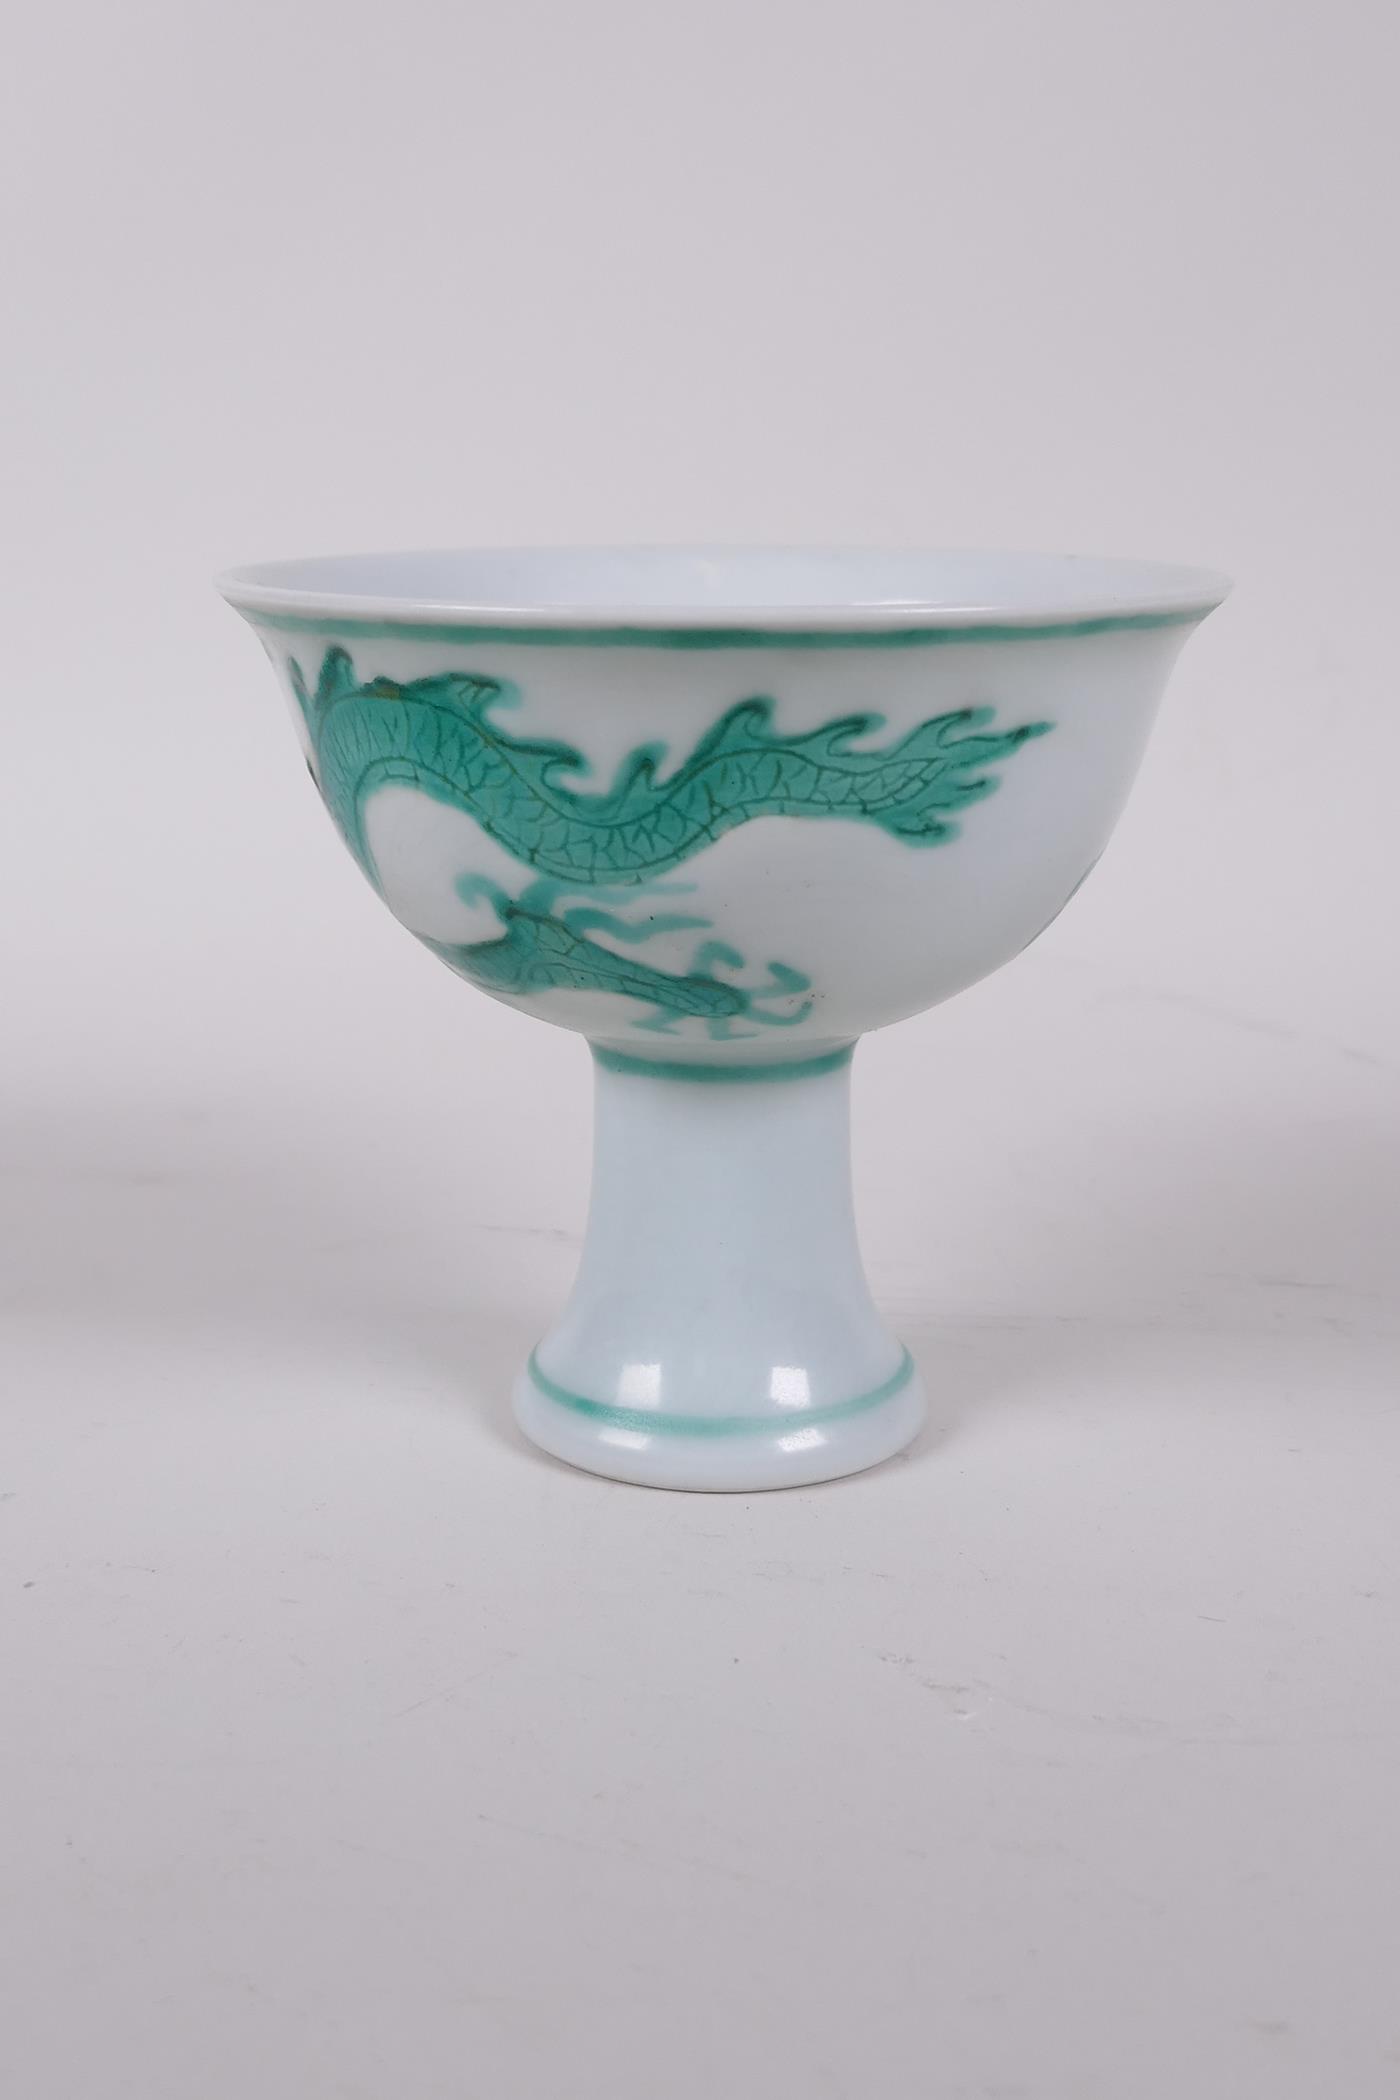 A Ming style porcelain stem cup with incised green dragon decoration, six character mark to base, 3" - Image 3 of 4